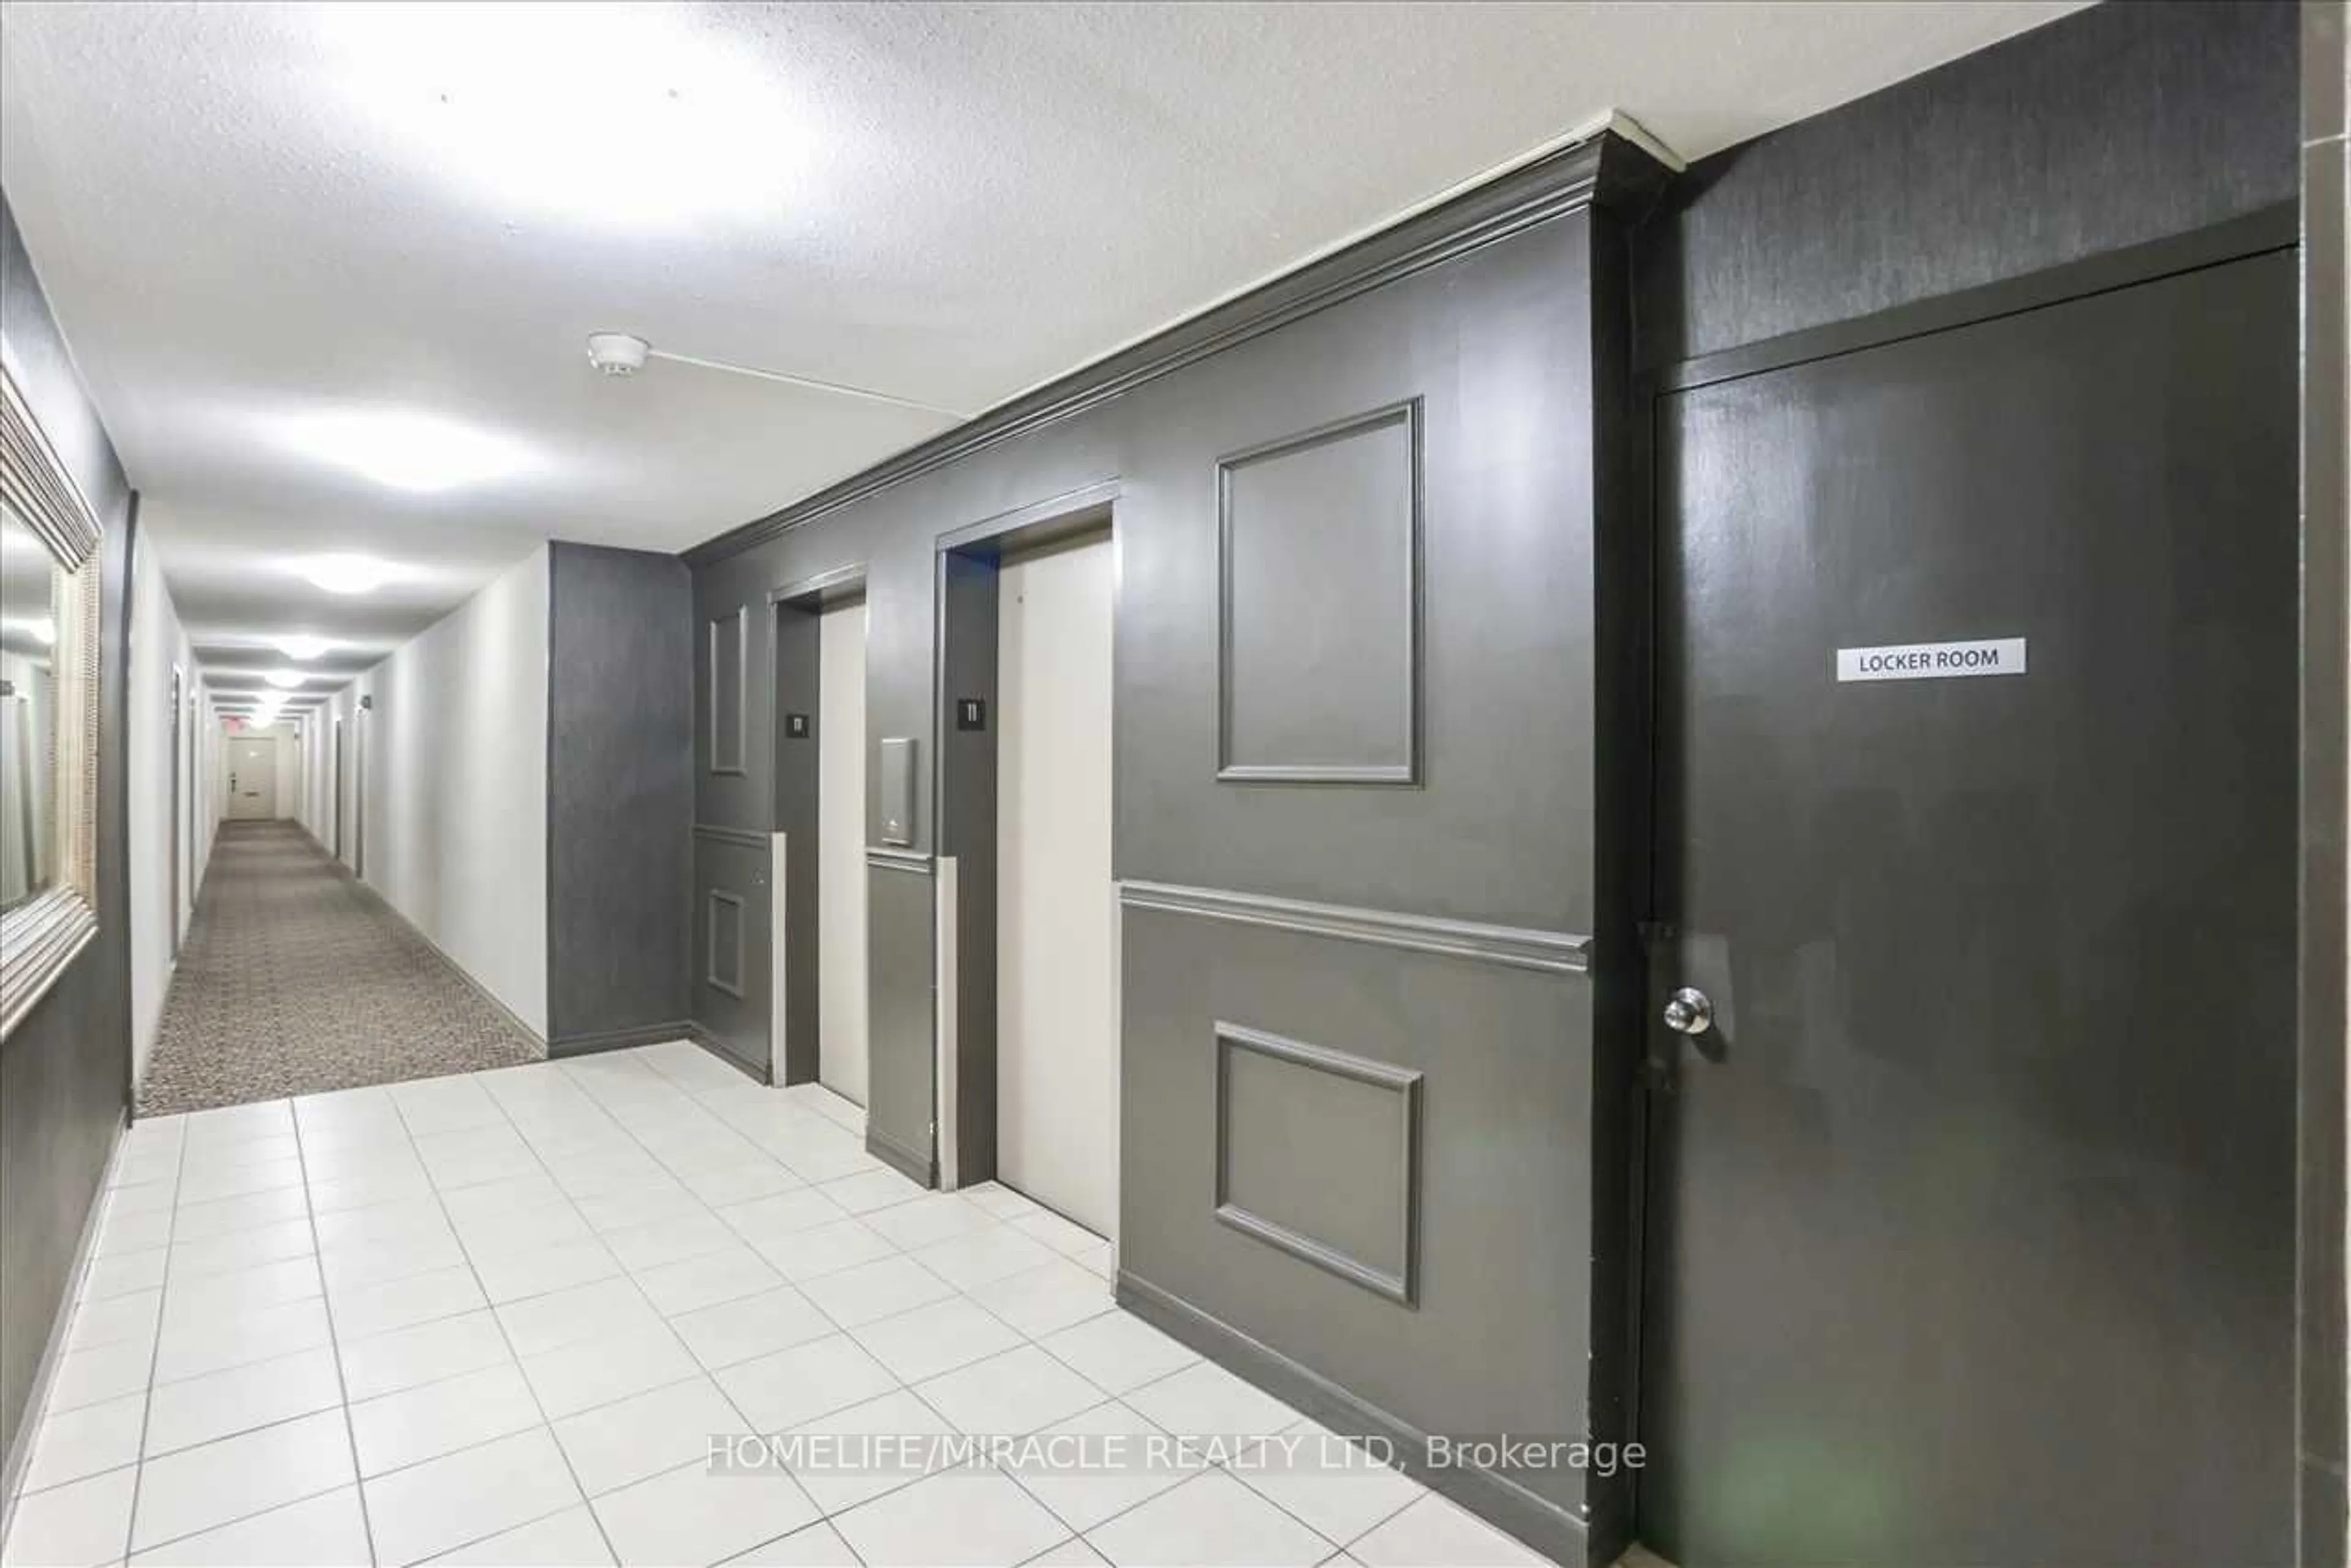 Other indoor space for 3311 Kingston Rd #1111, Toronto Ontario M1M 1R1